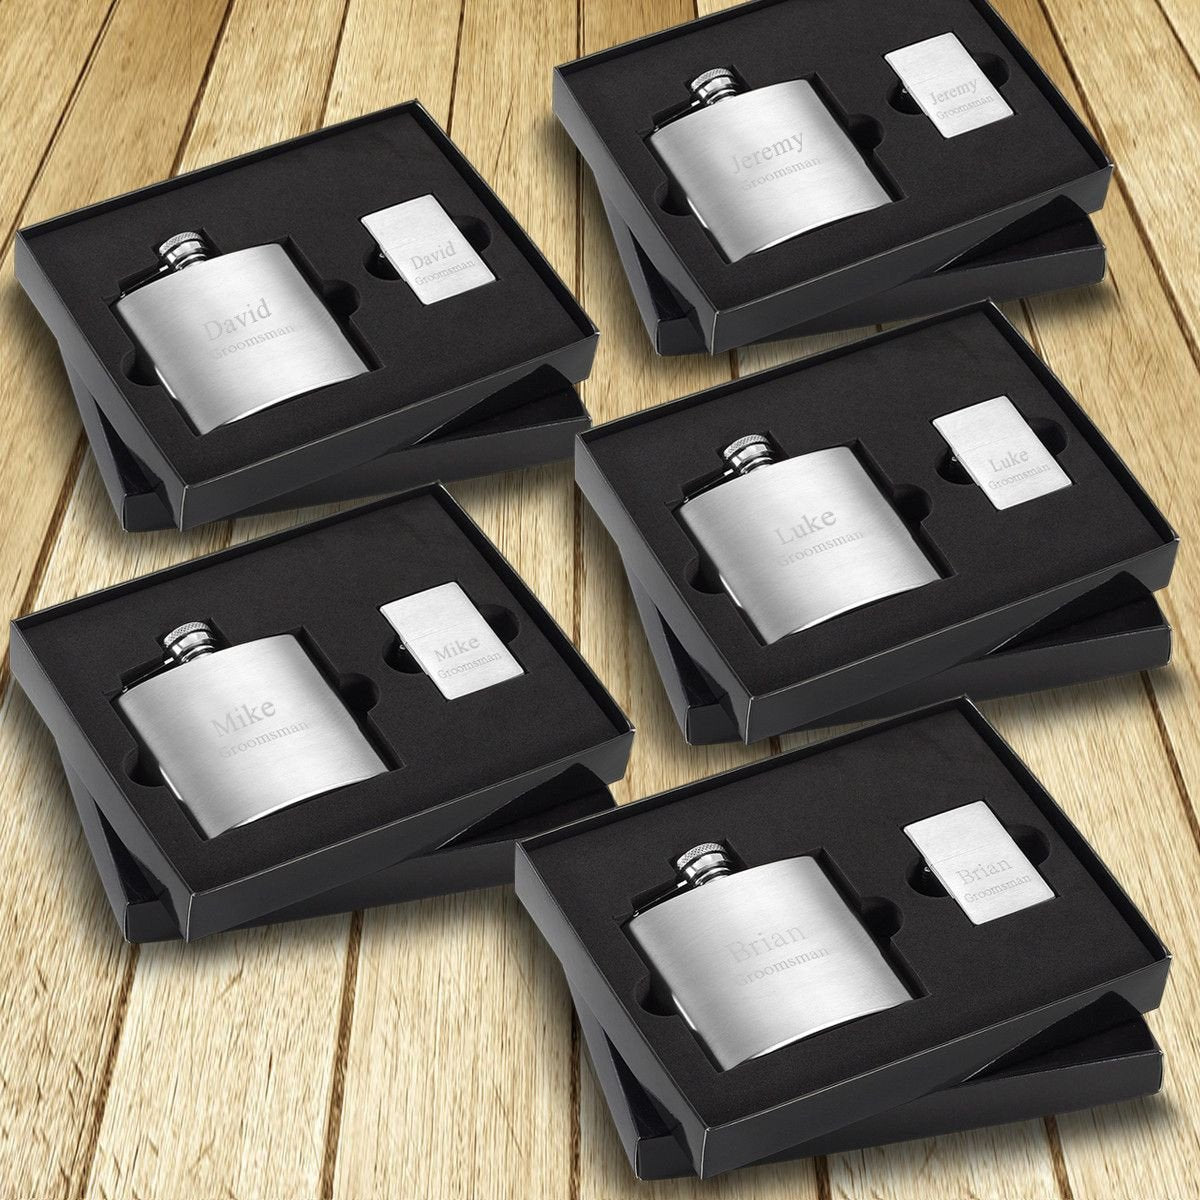 Personalized 4 oz. Brushed Flask and Lighter Gift Box - Set of 5 Boxes